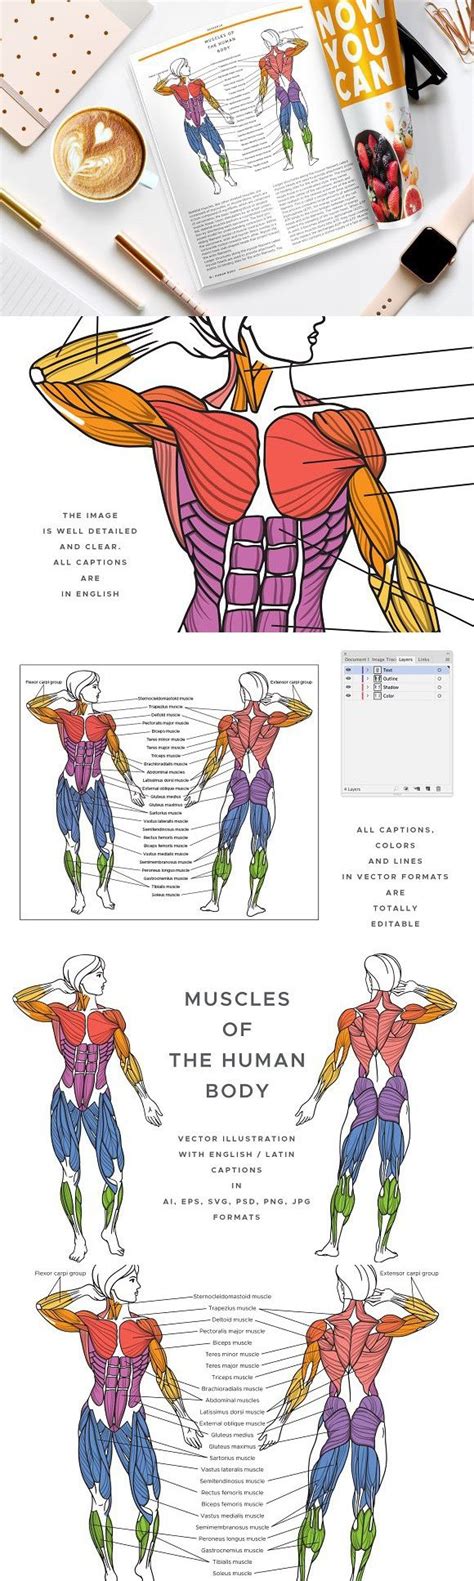 Skeletal muscles, like other striated muscles, are composed of muscle cells, called muscle fibers, which are in turn composed of myofibrils, which are composed of sarcomeres, the basic building block of striated. Muscles Of The Human Body | Human muscular system, Human body, Human